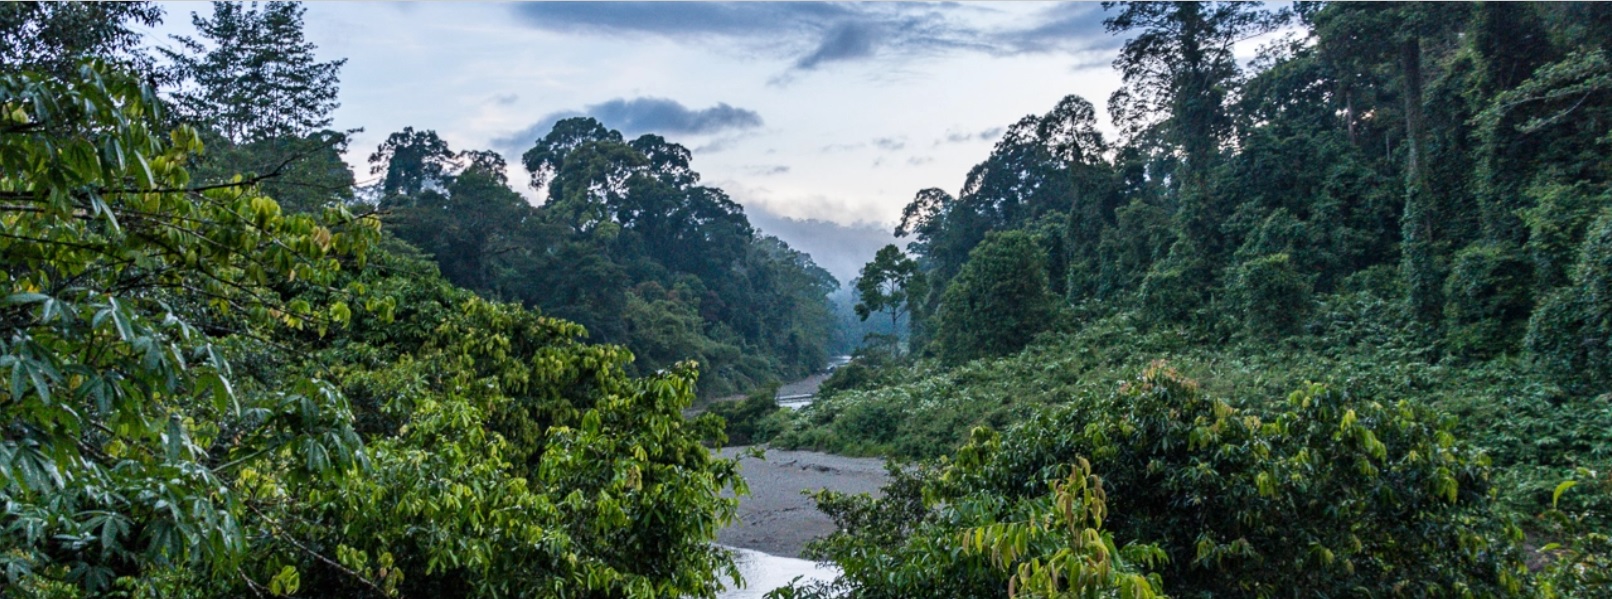 Is colonial history repeating itself with Sabah forest carbon deal? (commentary)